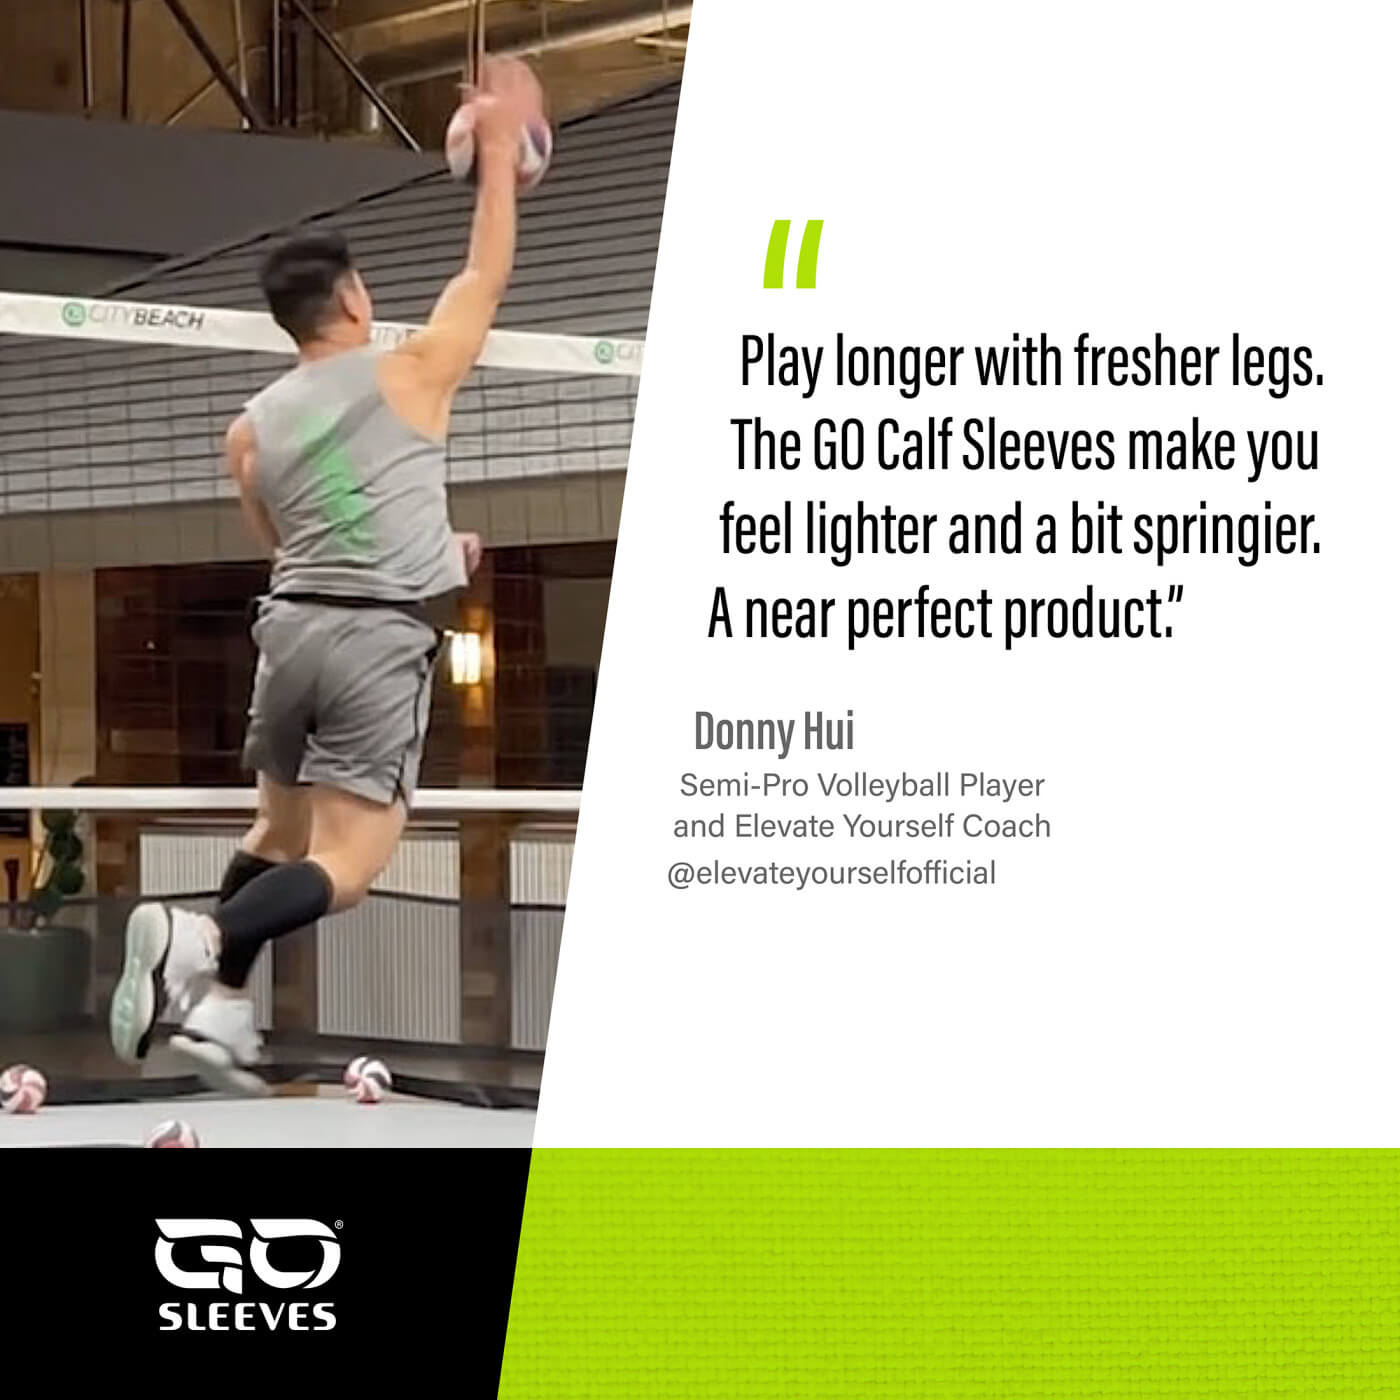 Semi Pro Volleyball Player and Coach Donny Hui Joins GO Sleeves to Recover Faster and Play Longer